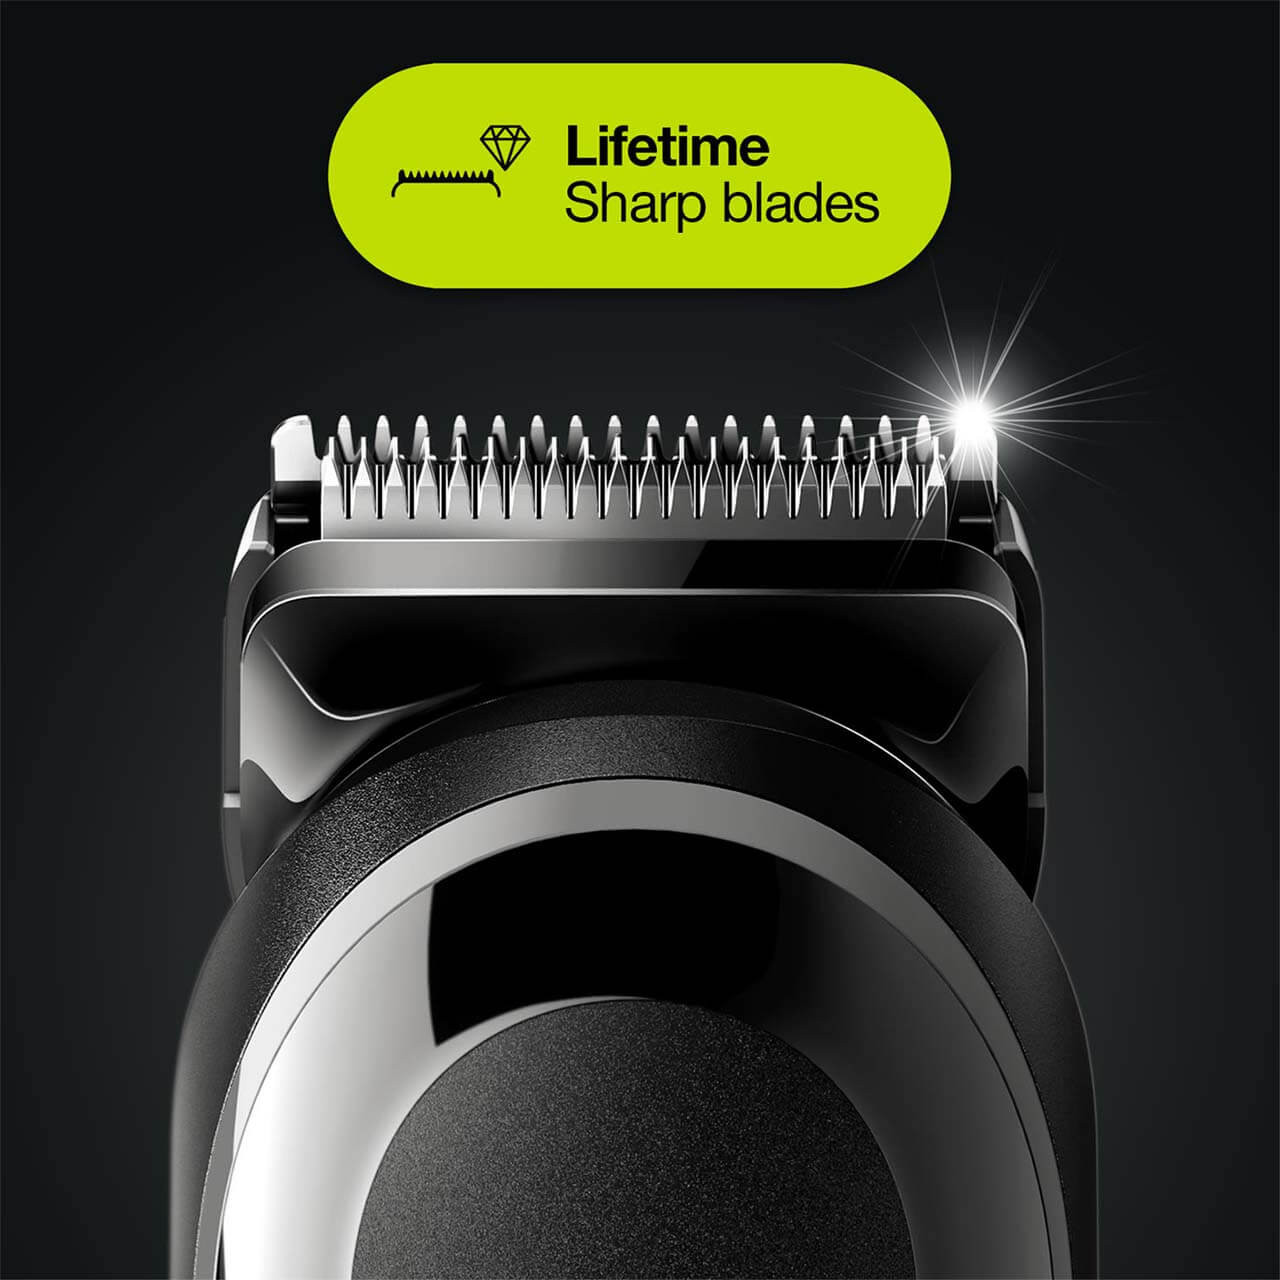 Face, Hair, Black 6-in-1 3 styling Body, trimmer kit, and All-in-One for